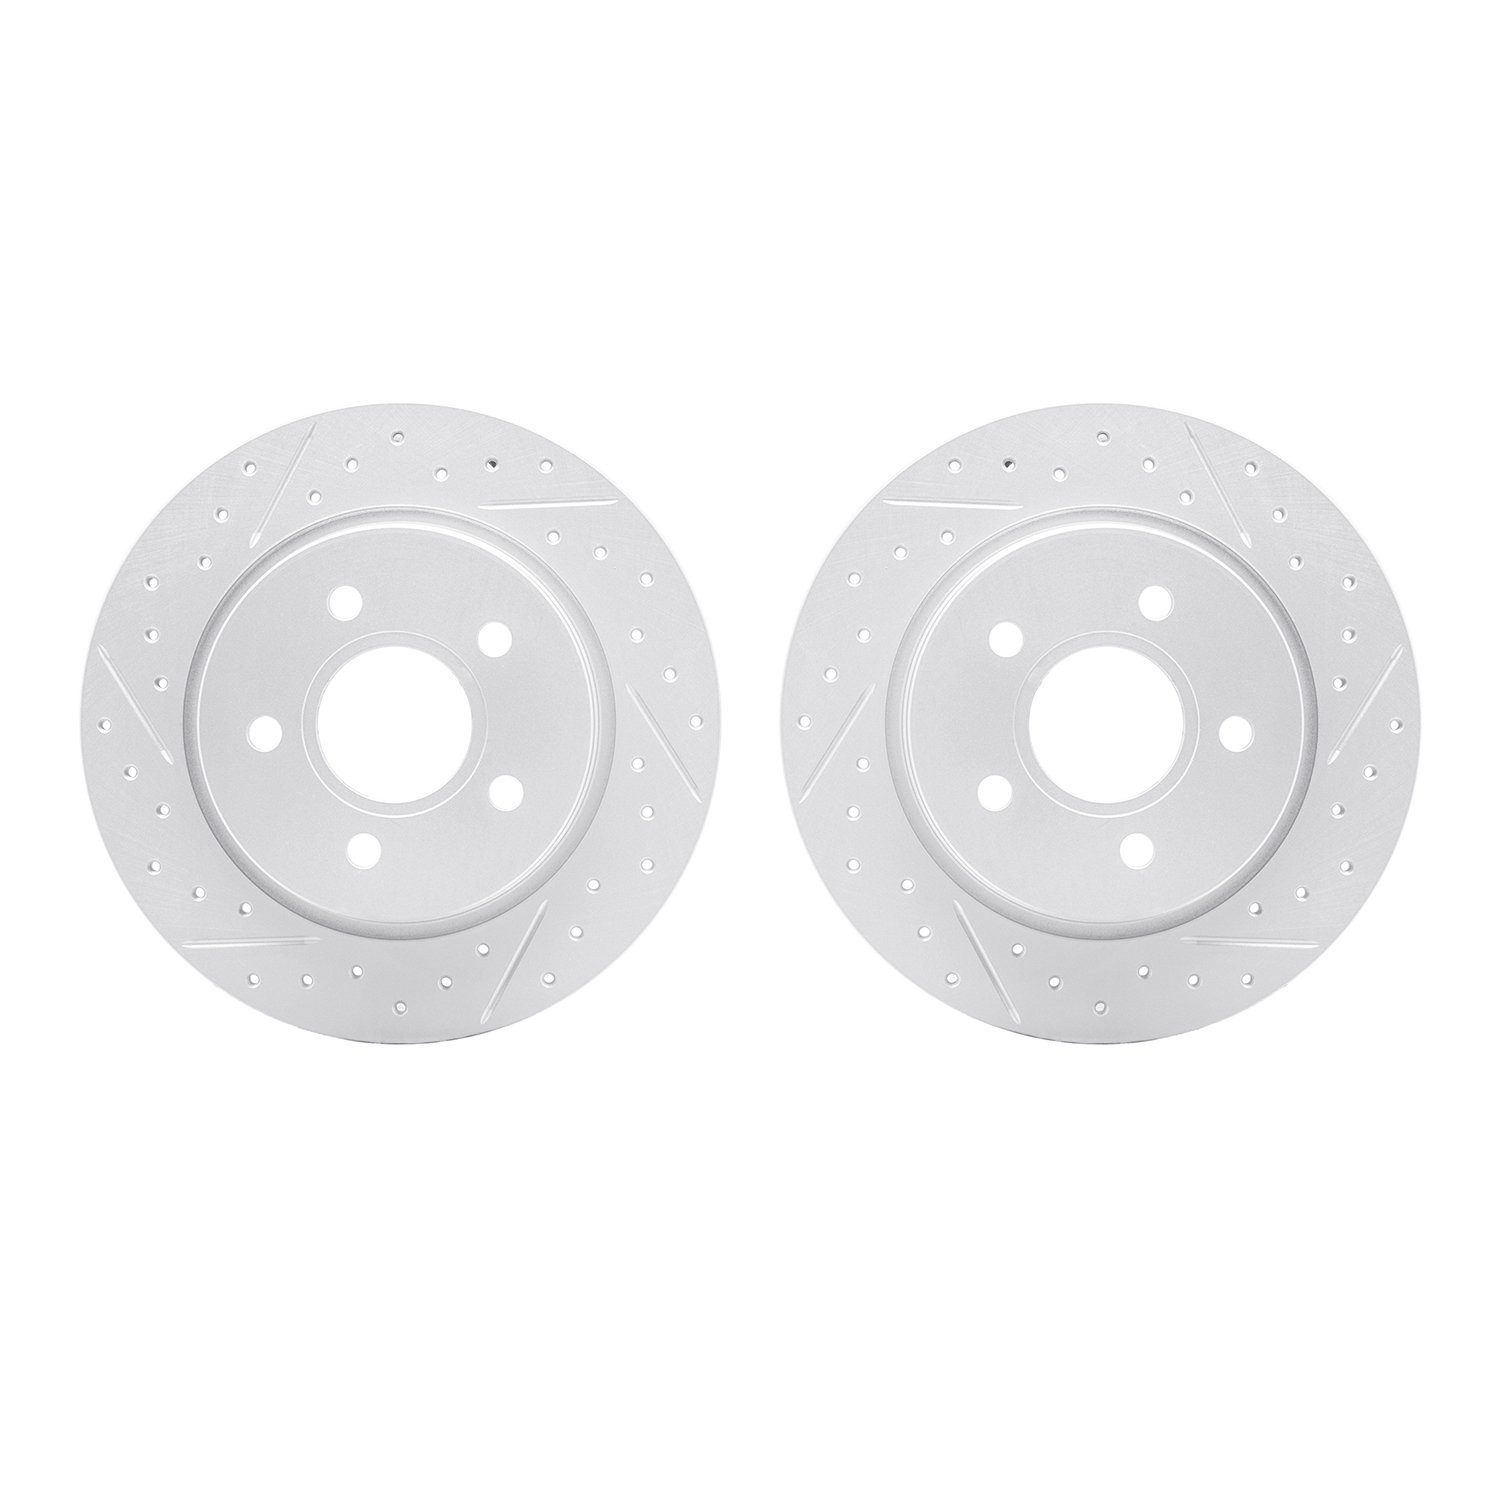 2002-54160 Geoperformance Drilled/Slotted Brake Rotors, 2012-2018 Ford/Lincoln/Mercury/Mazda, Position: Rear